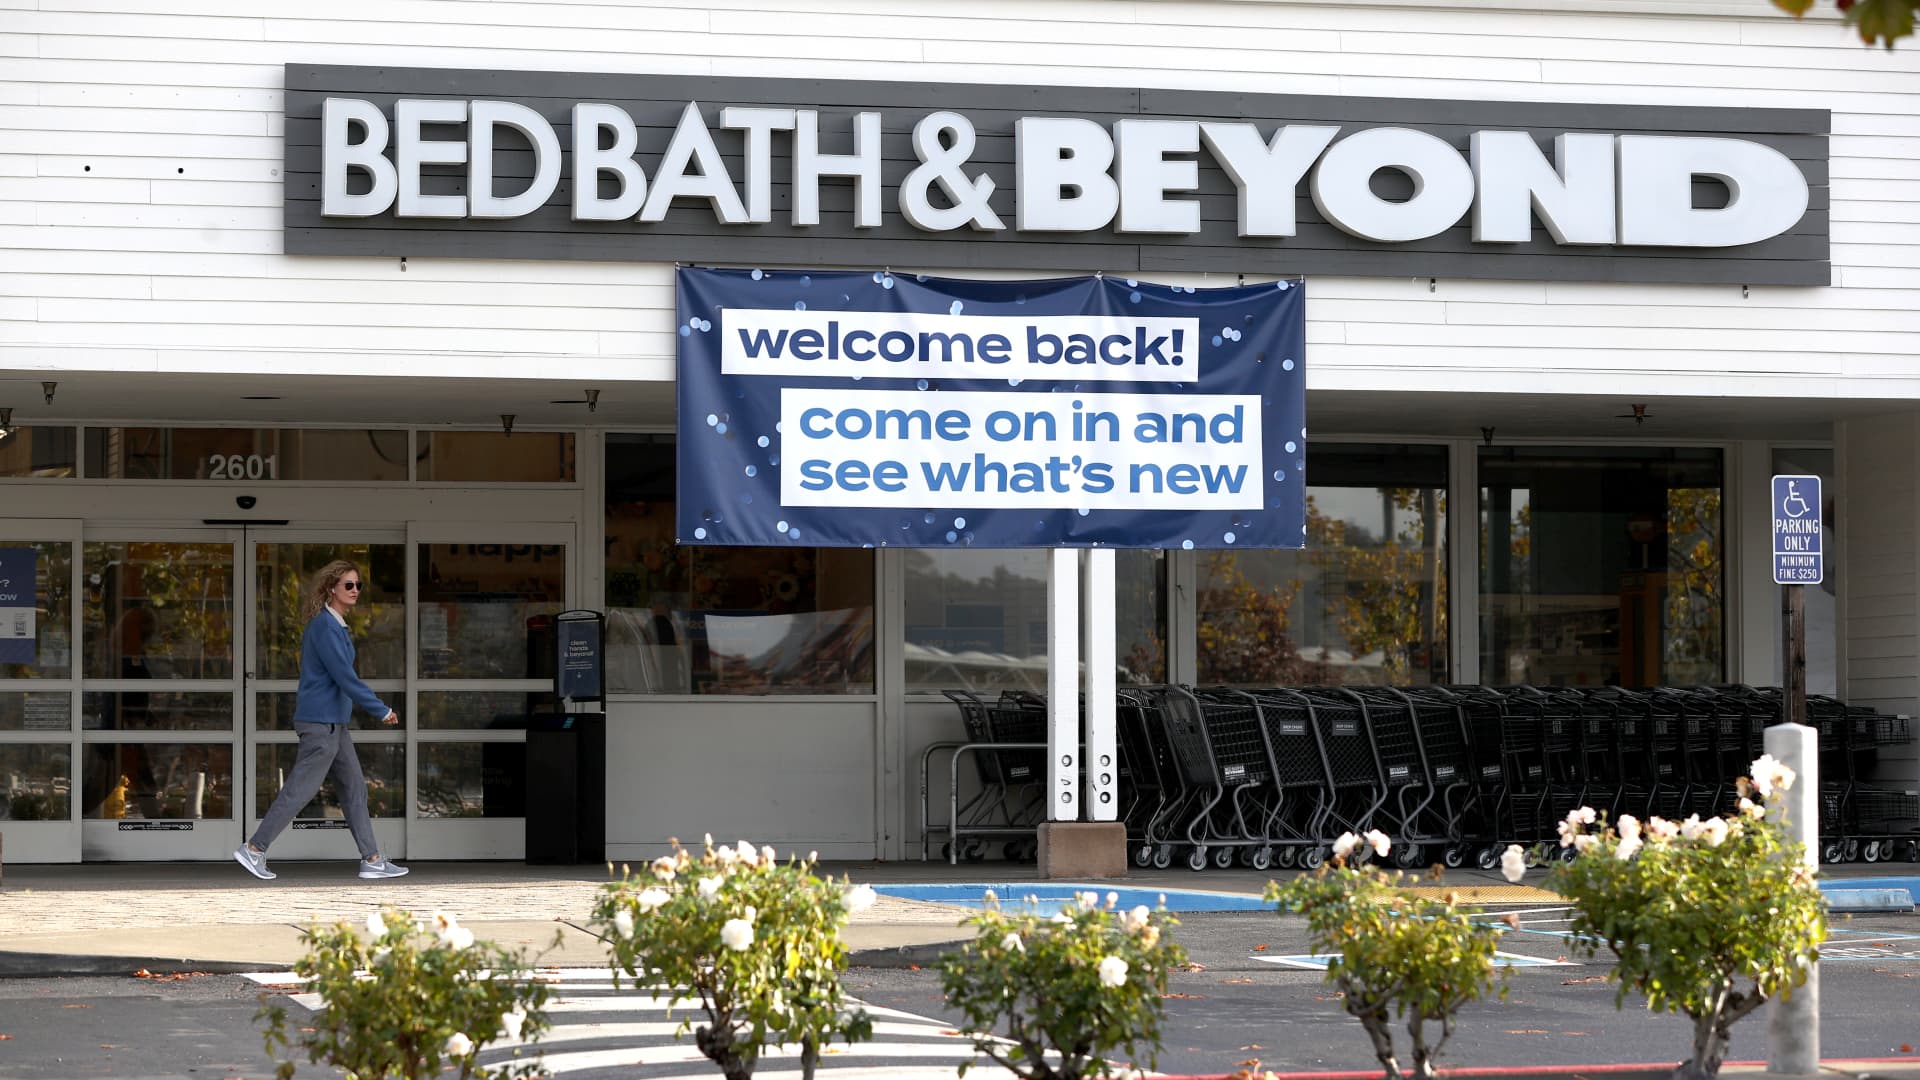 A pedestrian walks by a Bed Bath and Beyond store on November 04, 2021 in Larkspur, California.